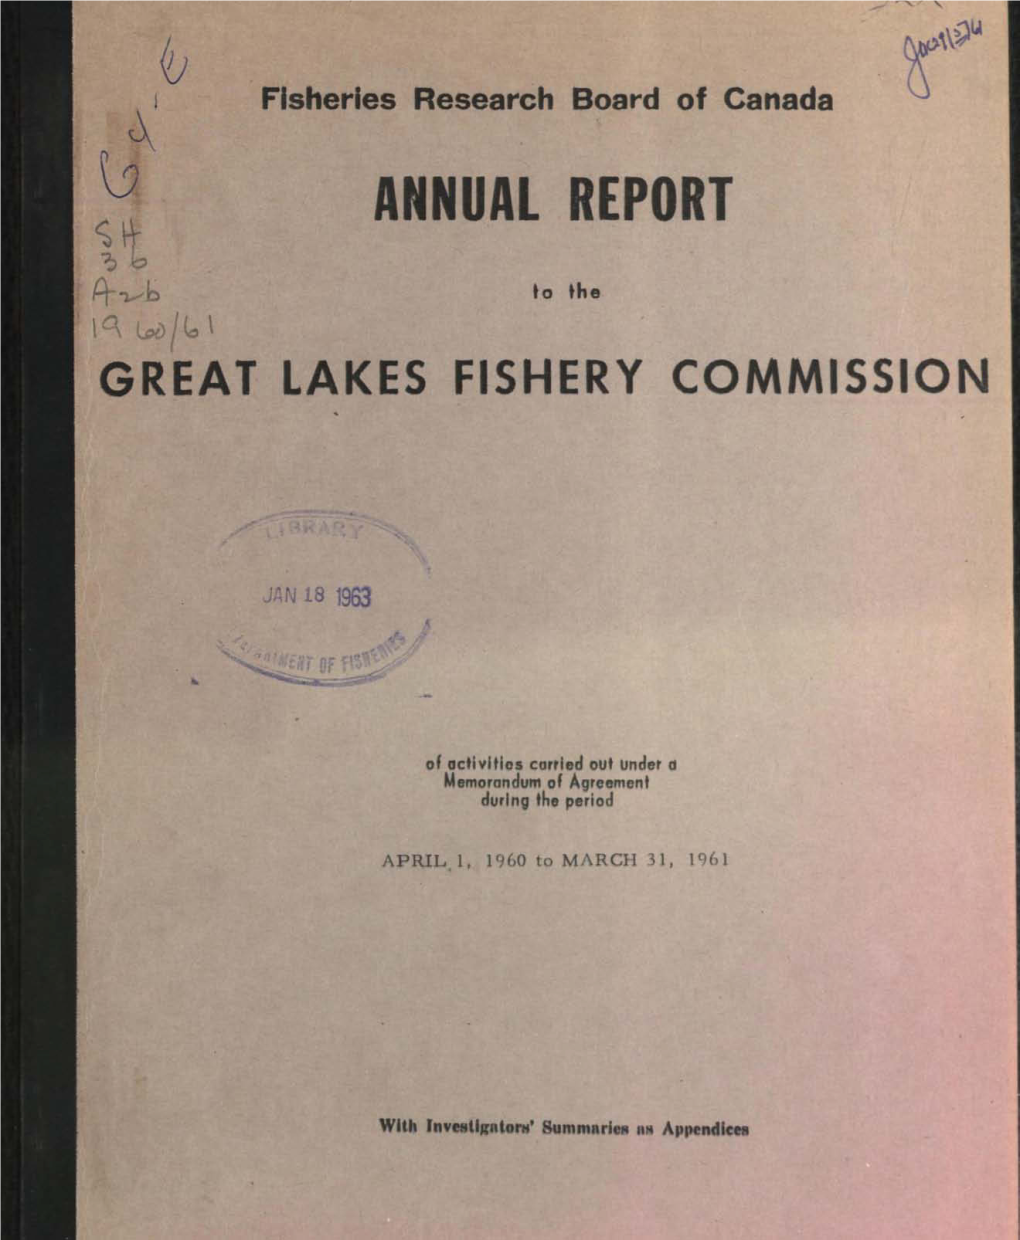 Fisheries Research Board of Canada Annual Report to the Great Lake